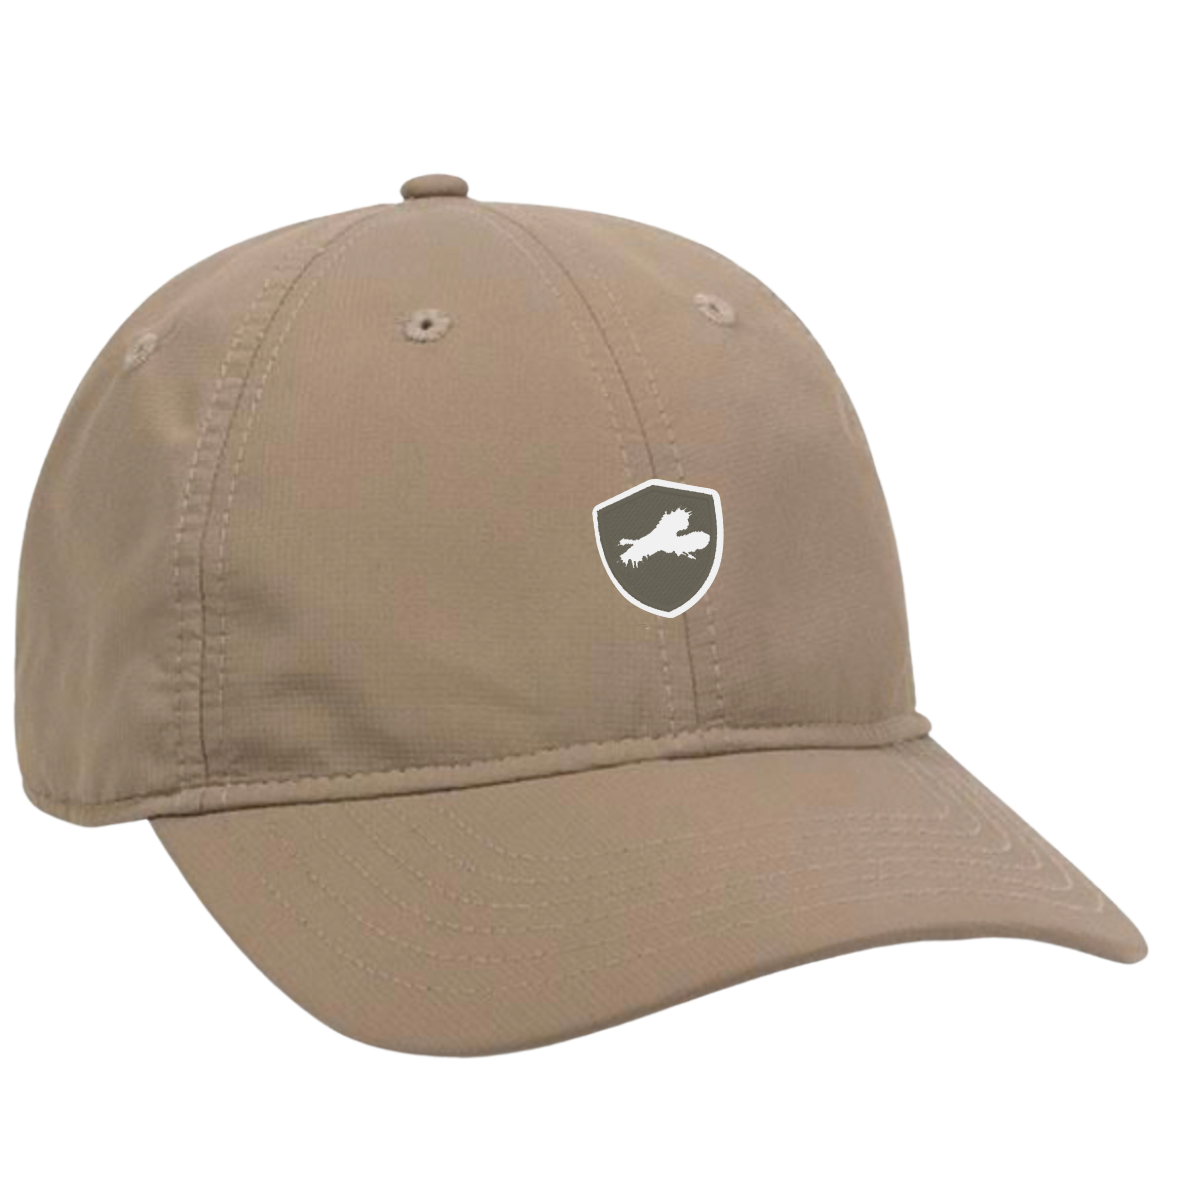 hunting hat, casual, tan, brown, khaki, nice, simple, public land, performance, outdoor cap, Richardson, lost hat